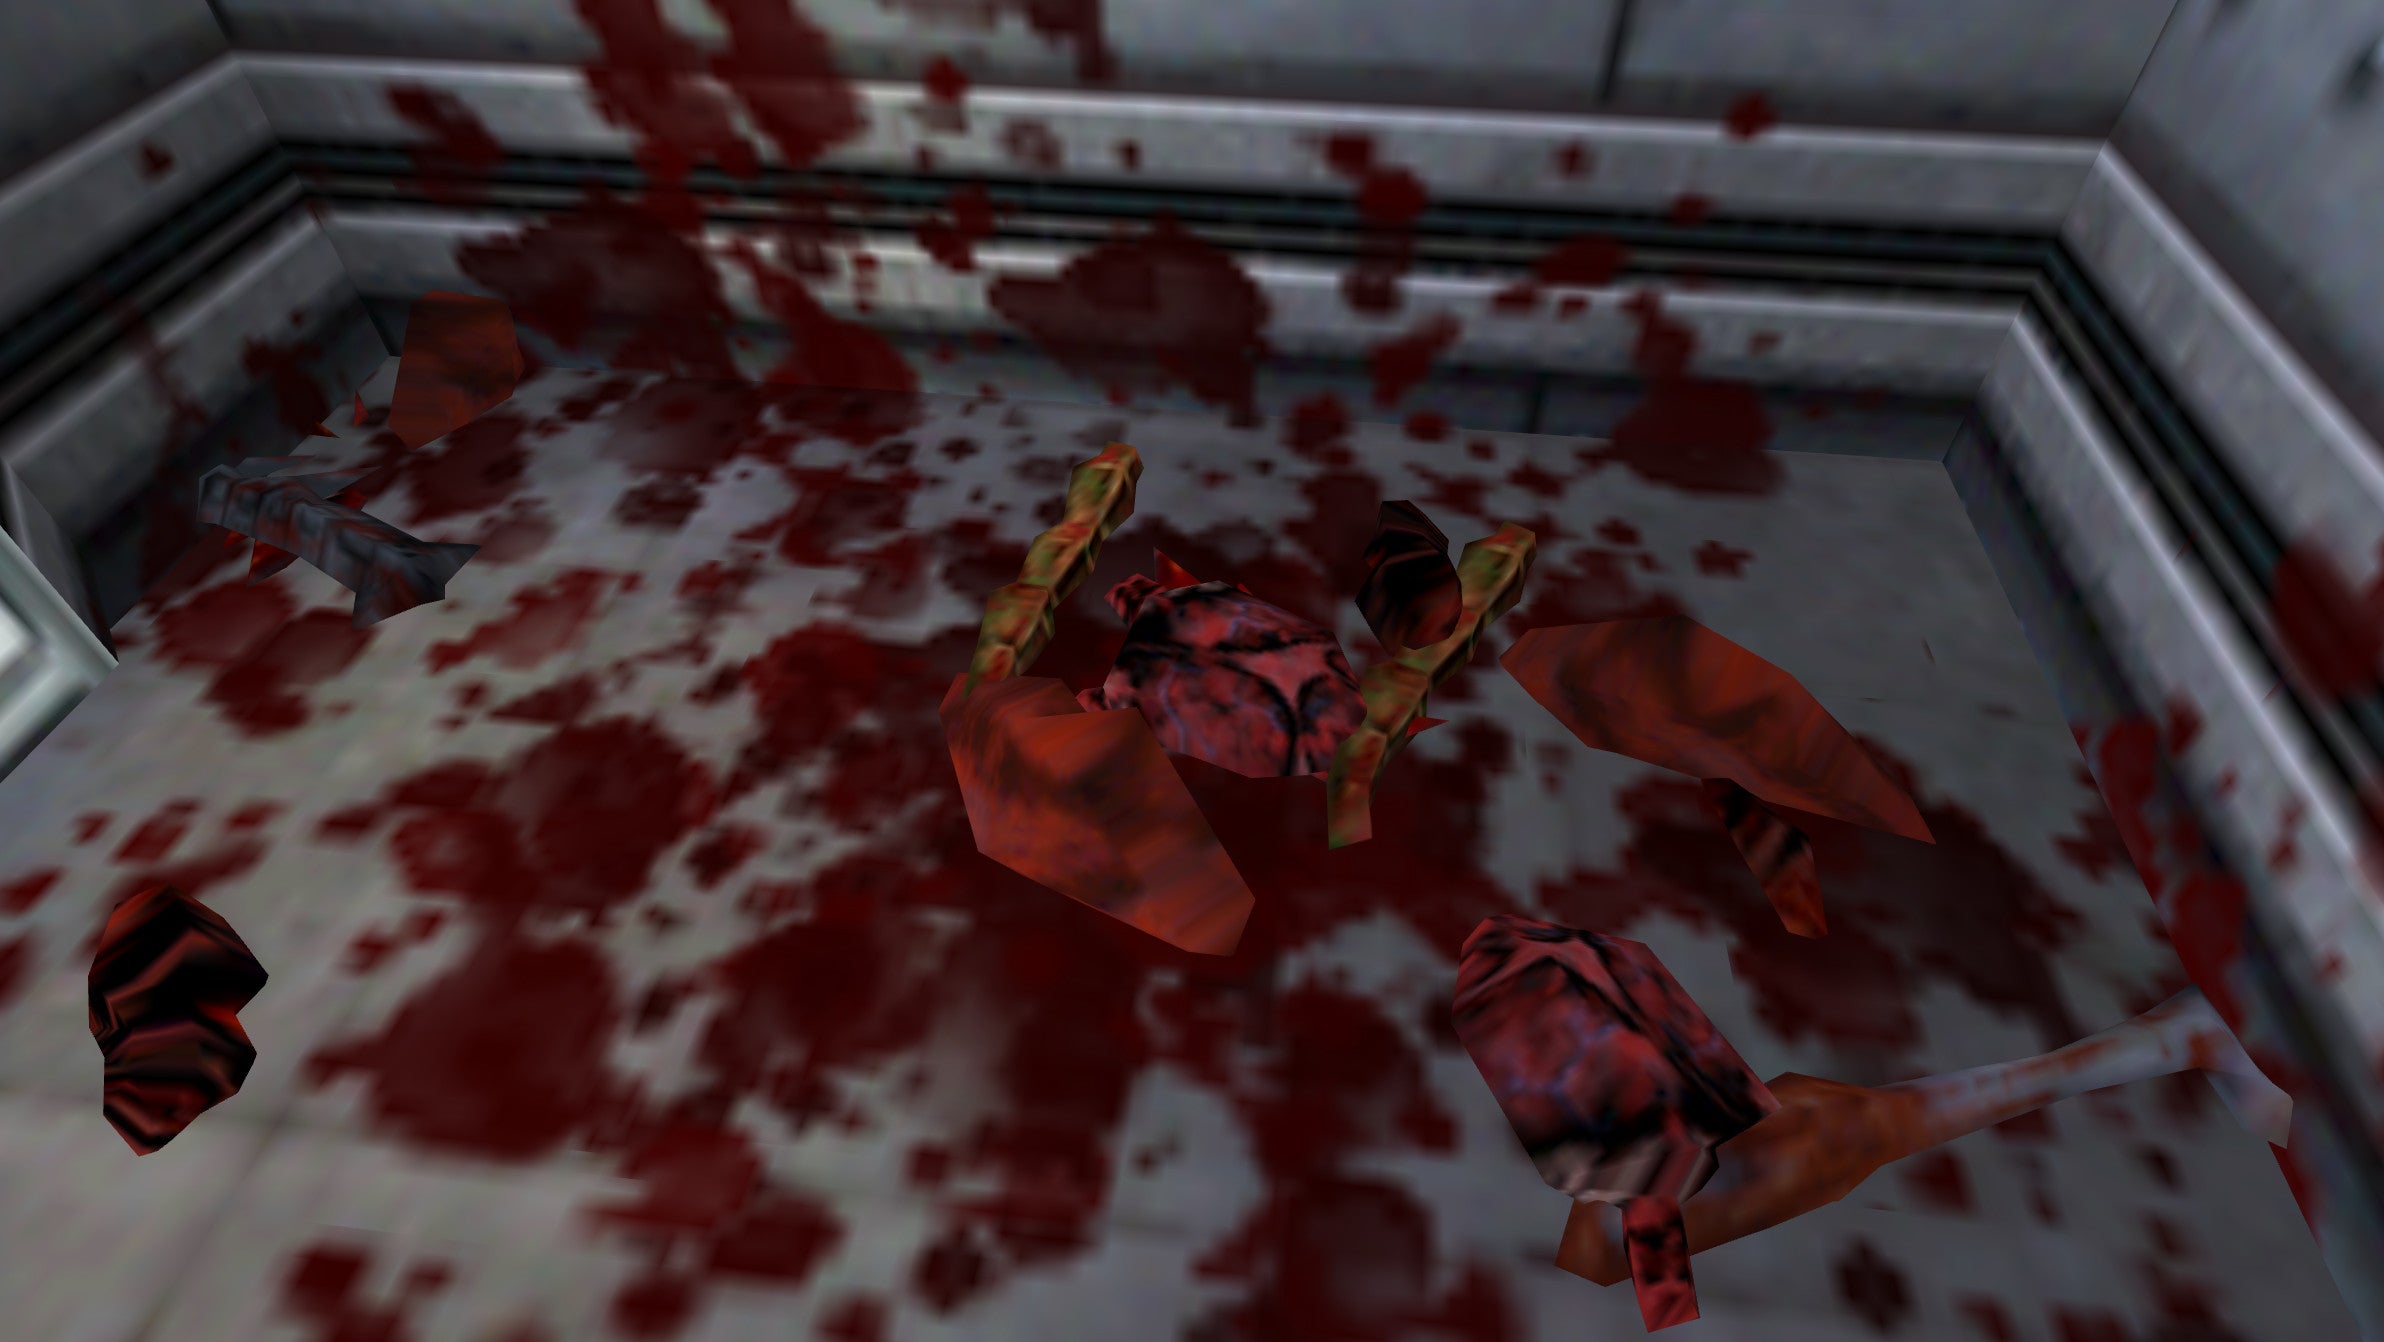 A shower of gibs, bones, and guts in a Half-Life screenshot.